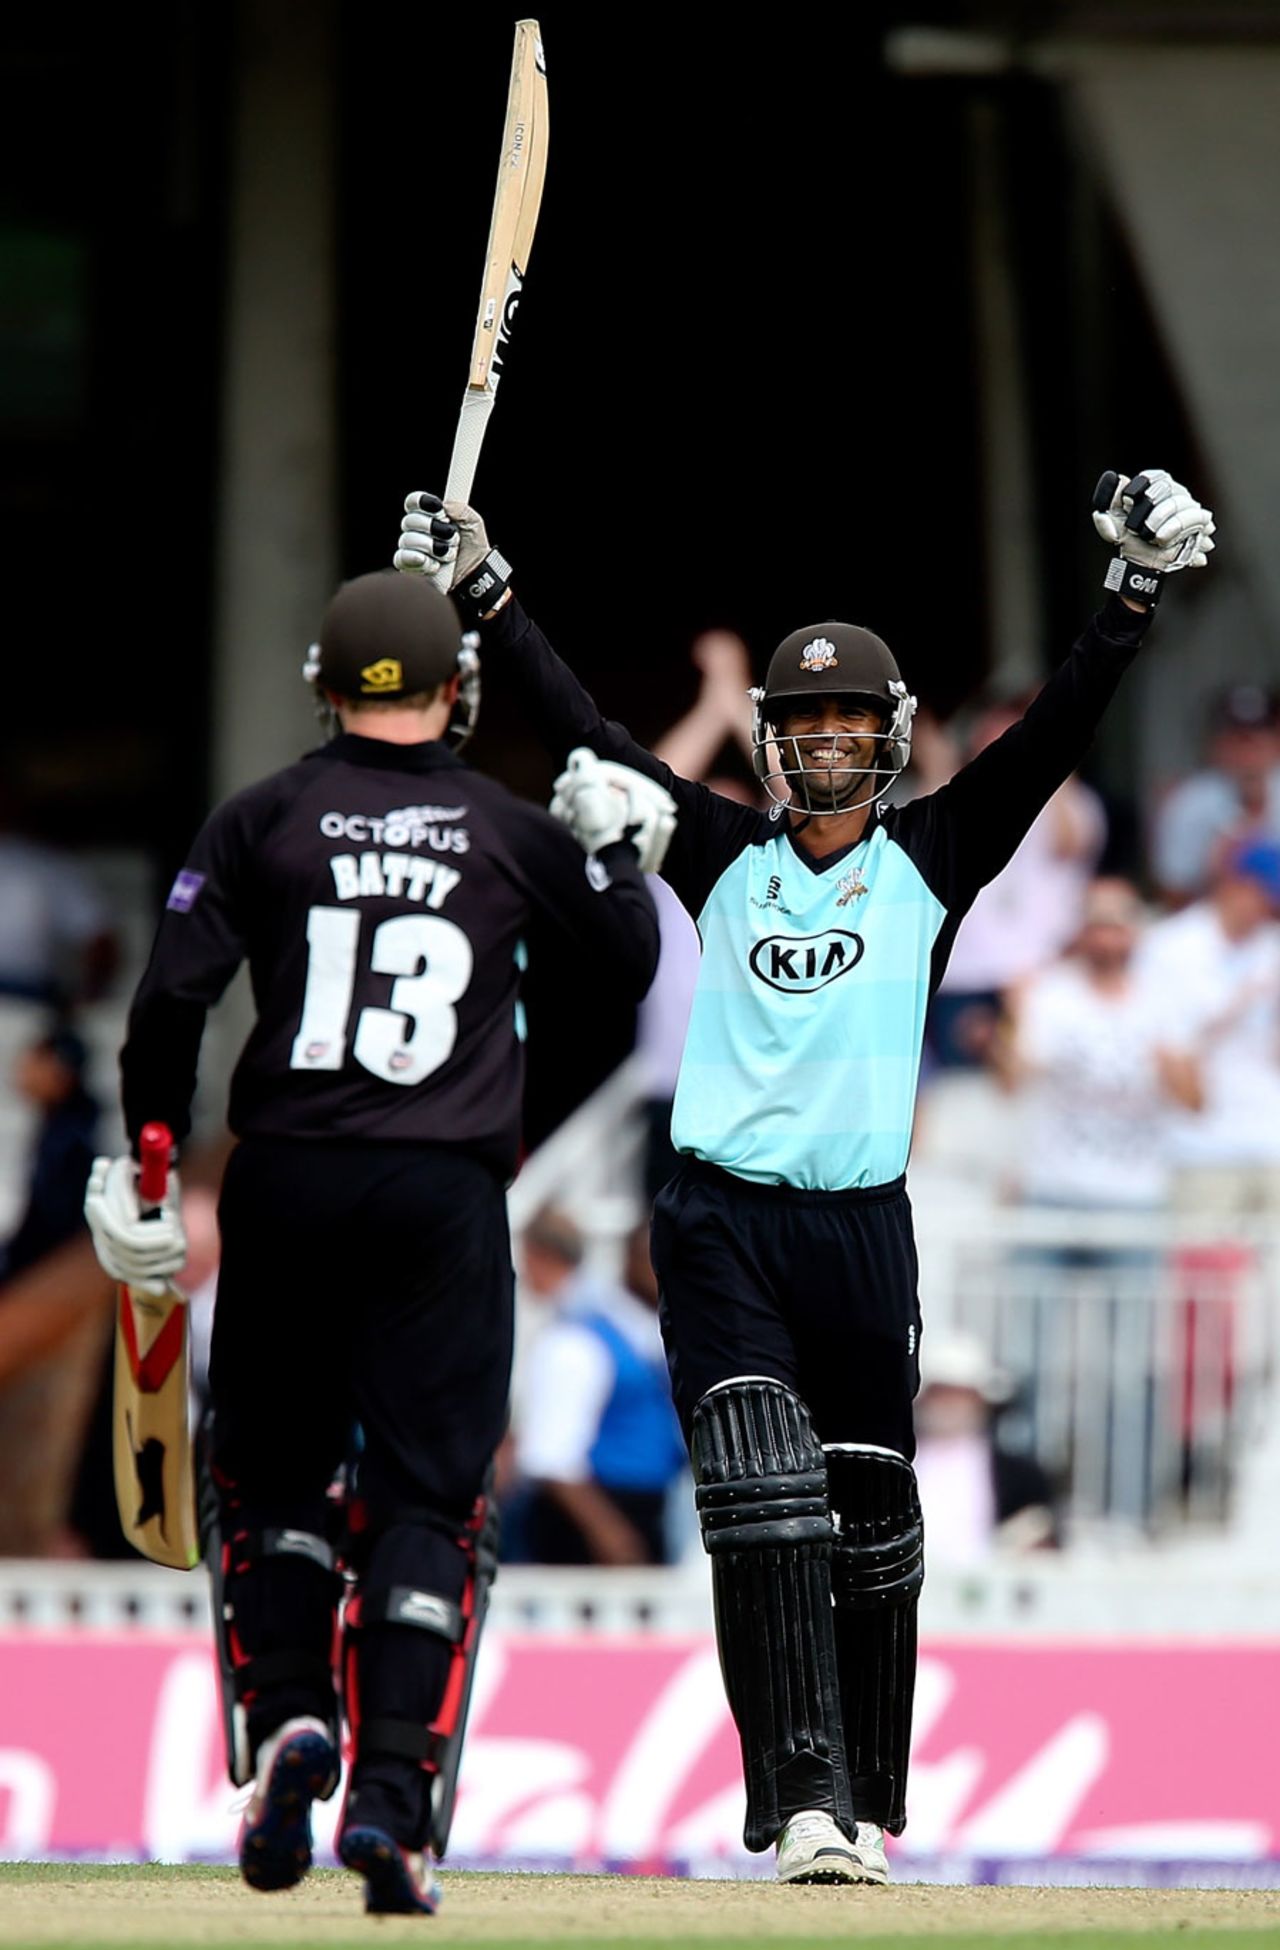 Robin Peterson celebrates hitting the winning runs, Surrey v Worcestershire, NatWest T20 Blast quarter-final, The Oval, August 2, 2014